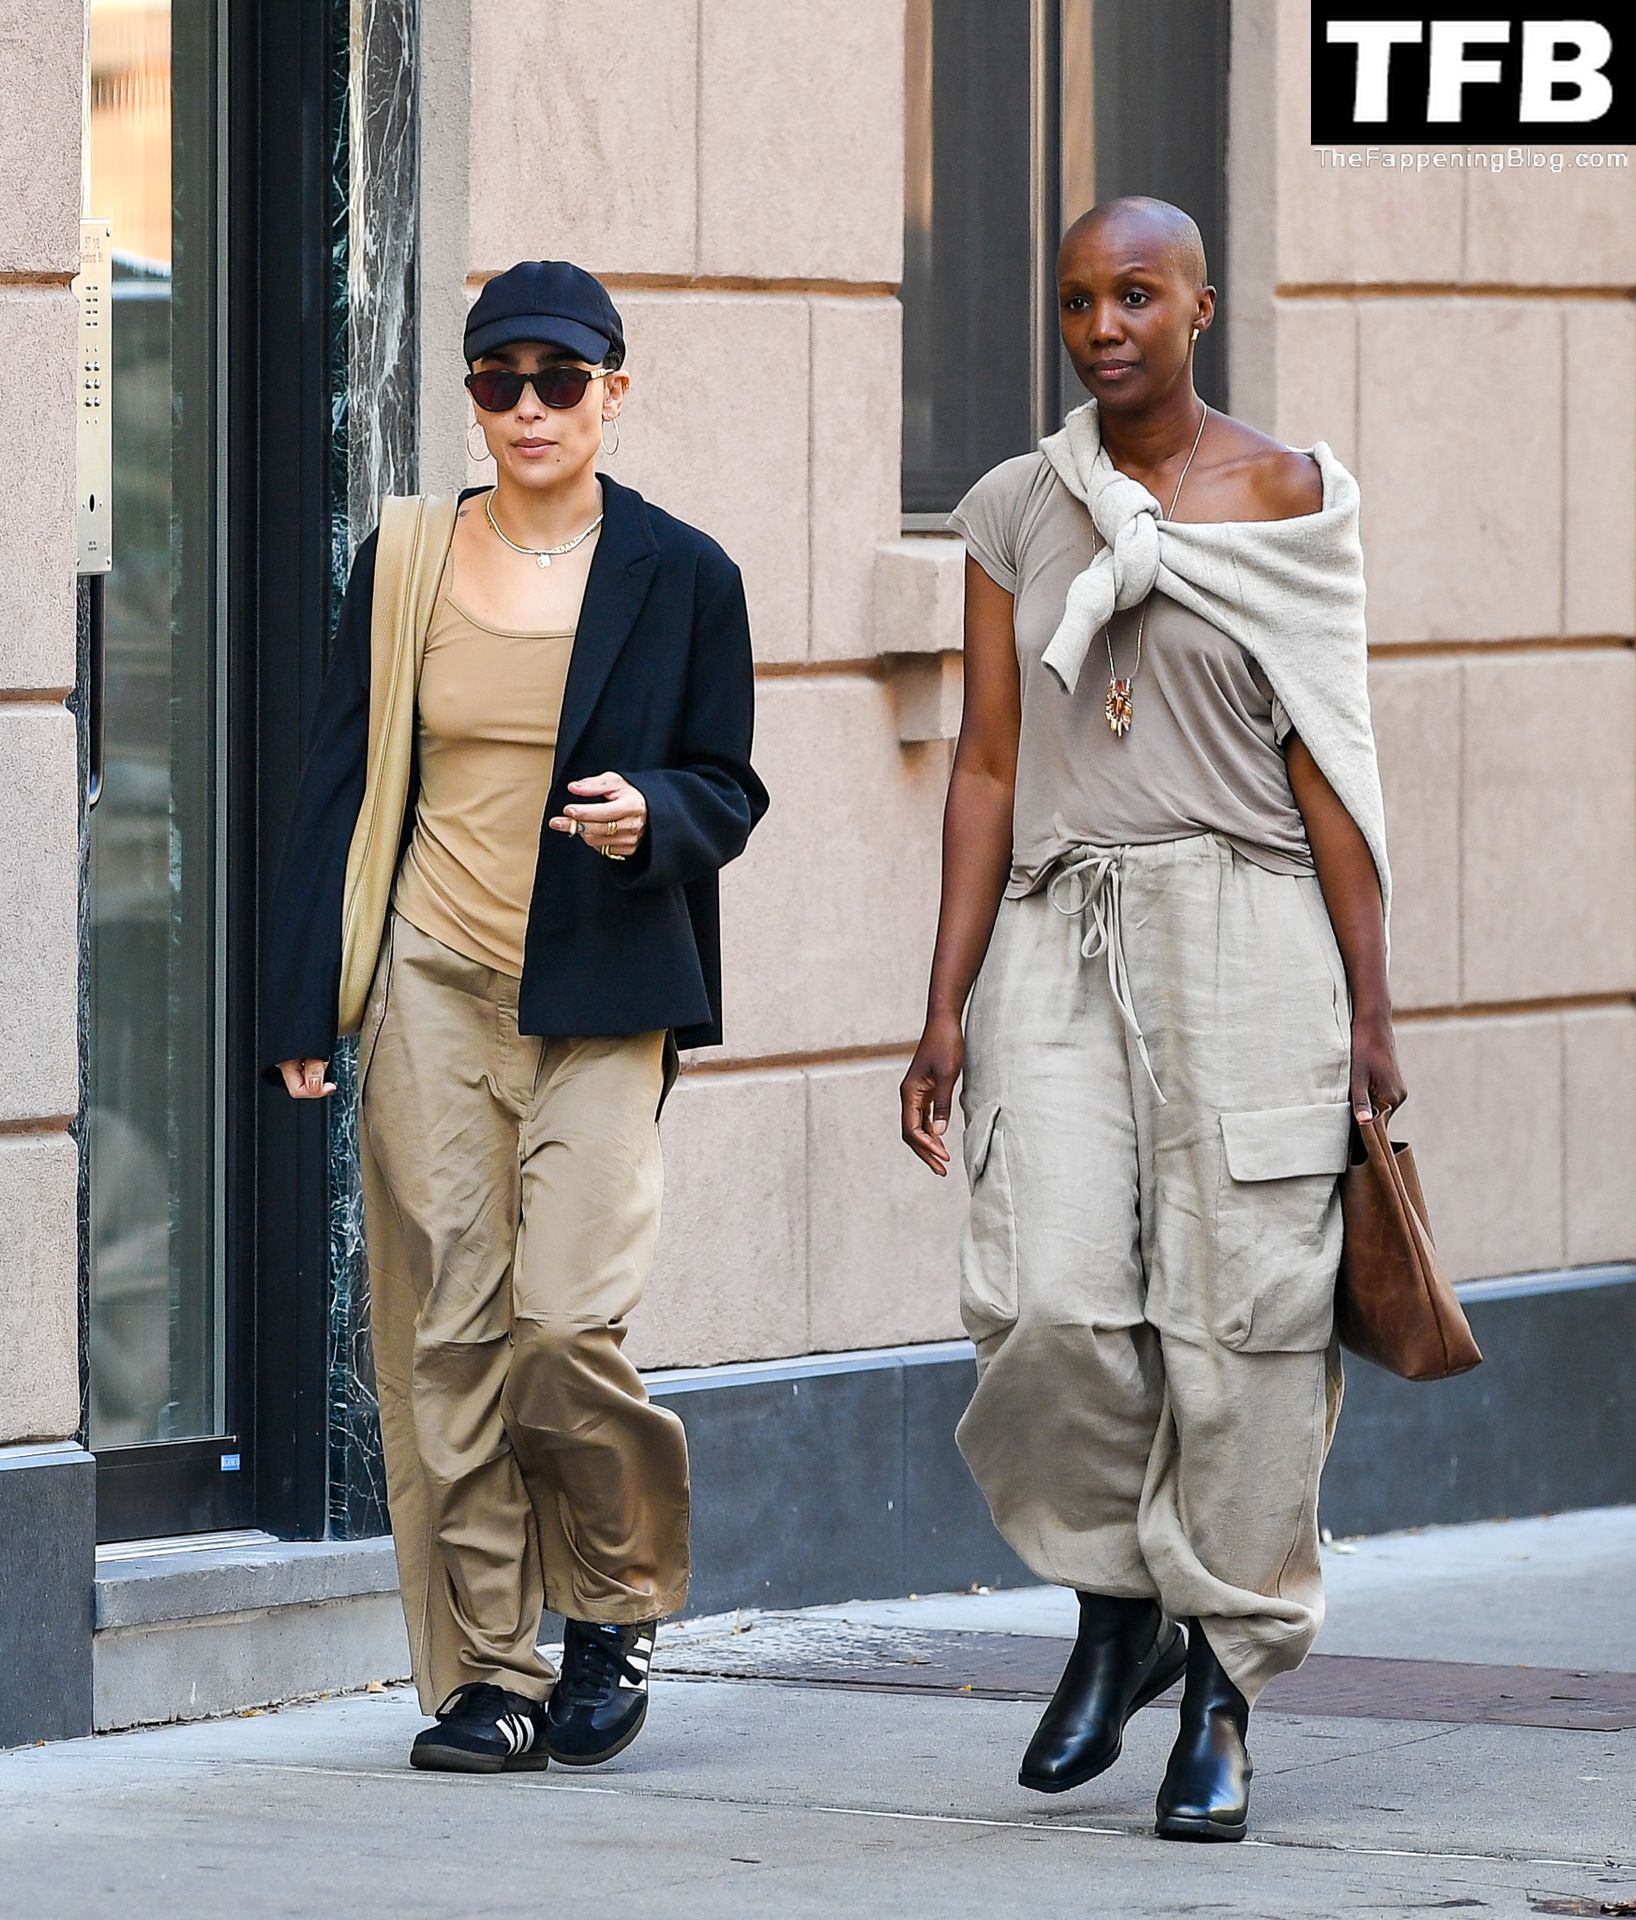 Zoe Kravitz Sexy Tits The Fappening Blog 3 - Braless Zoe Kravitz Steps Out With a Friend in NYC (13 Photos)